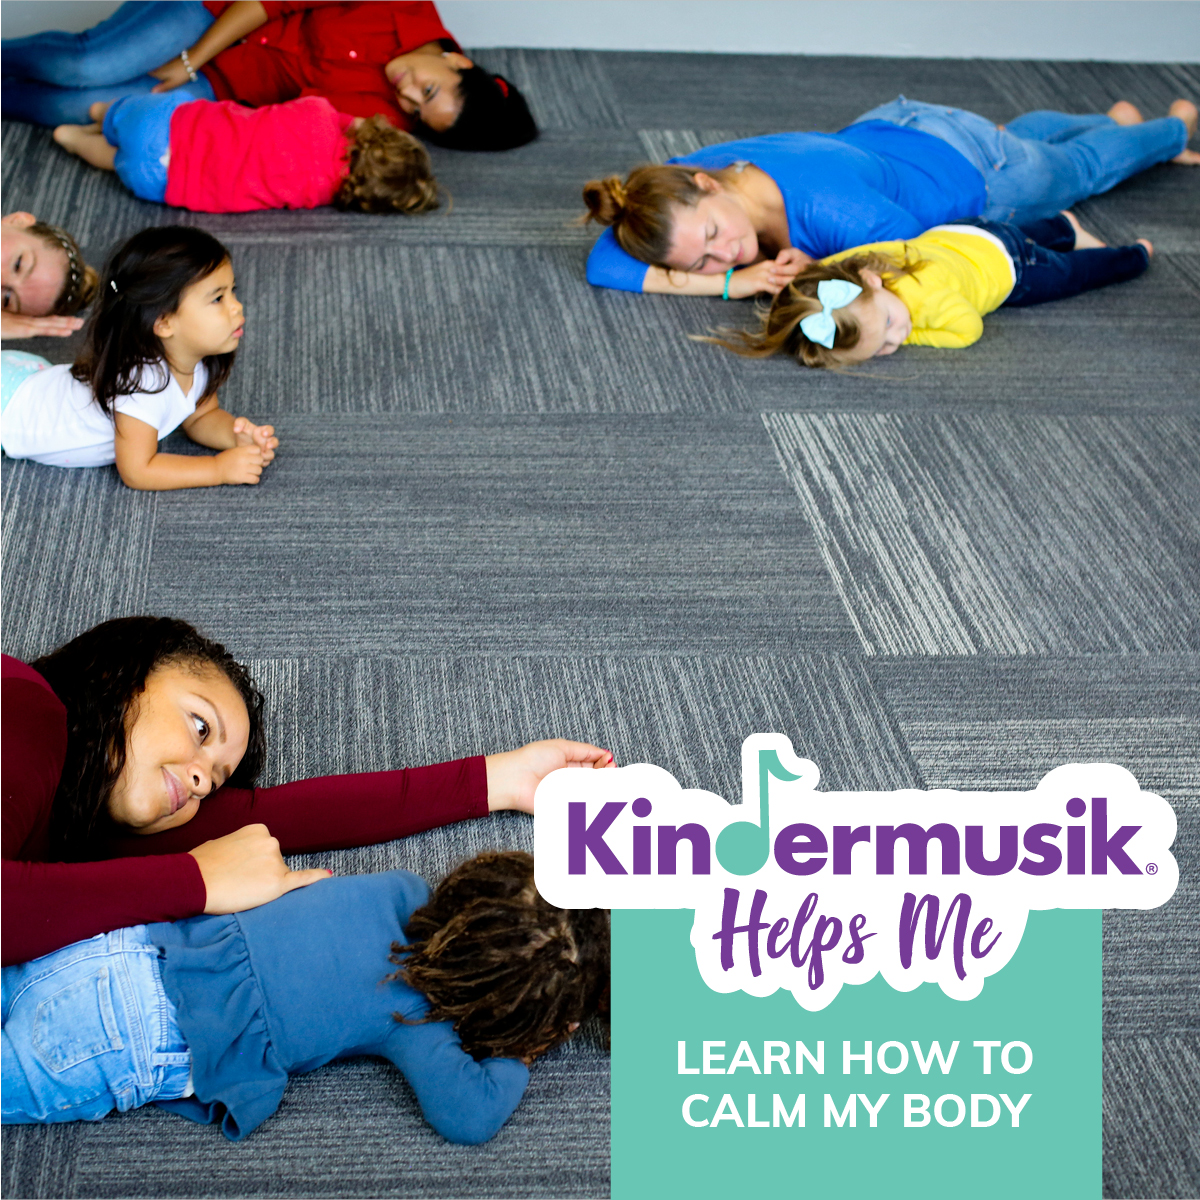 Music can energise AND calm our children's bodies. The right musical calming techniques can increase naptime and bedtime success.

#kindermusik  #kindermusikhelpme #kindermusikhelpswiththat
#calmness #calmwithmusic #bedtimeroutines #babybedtime #naptime[...]